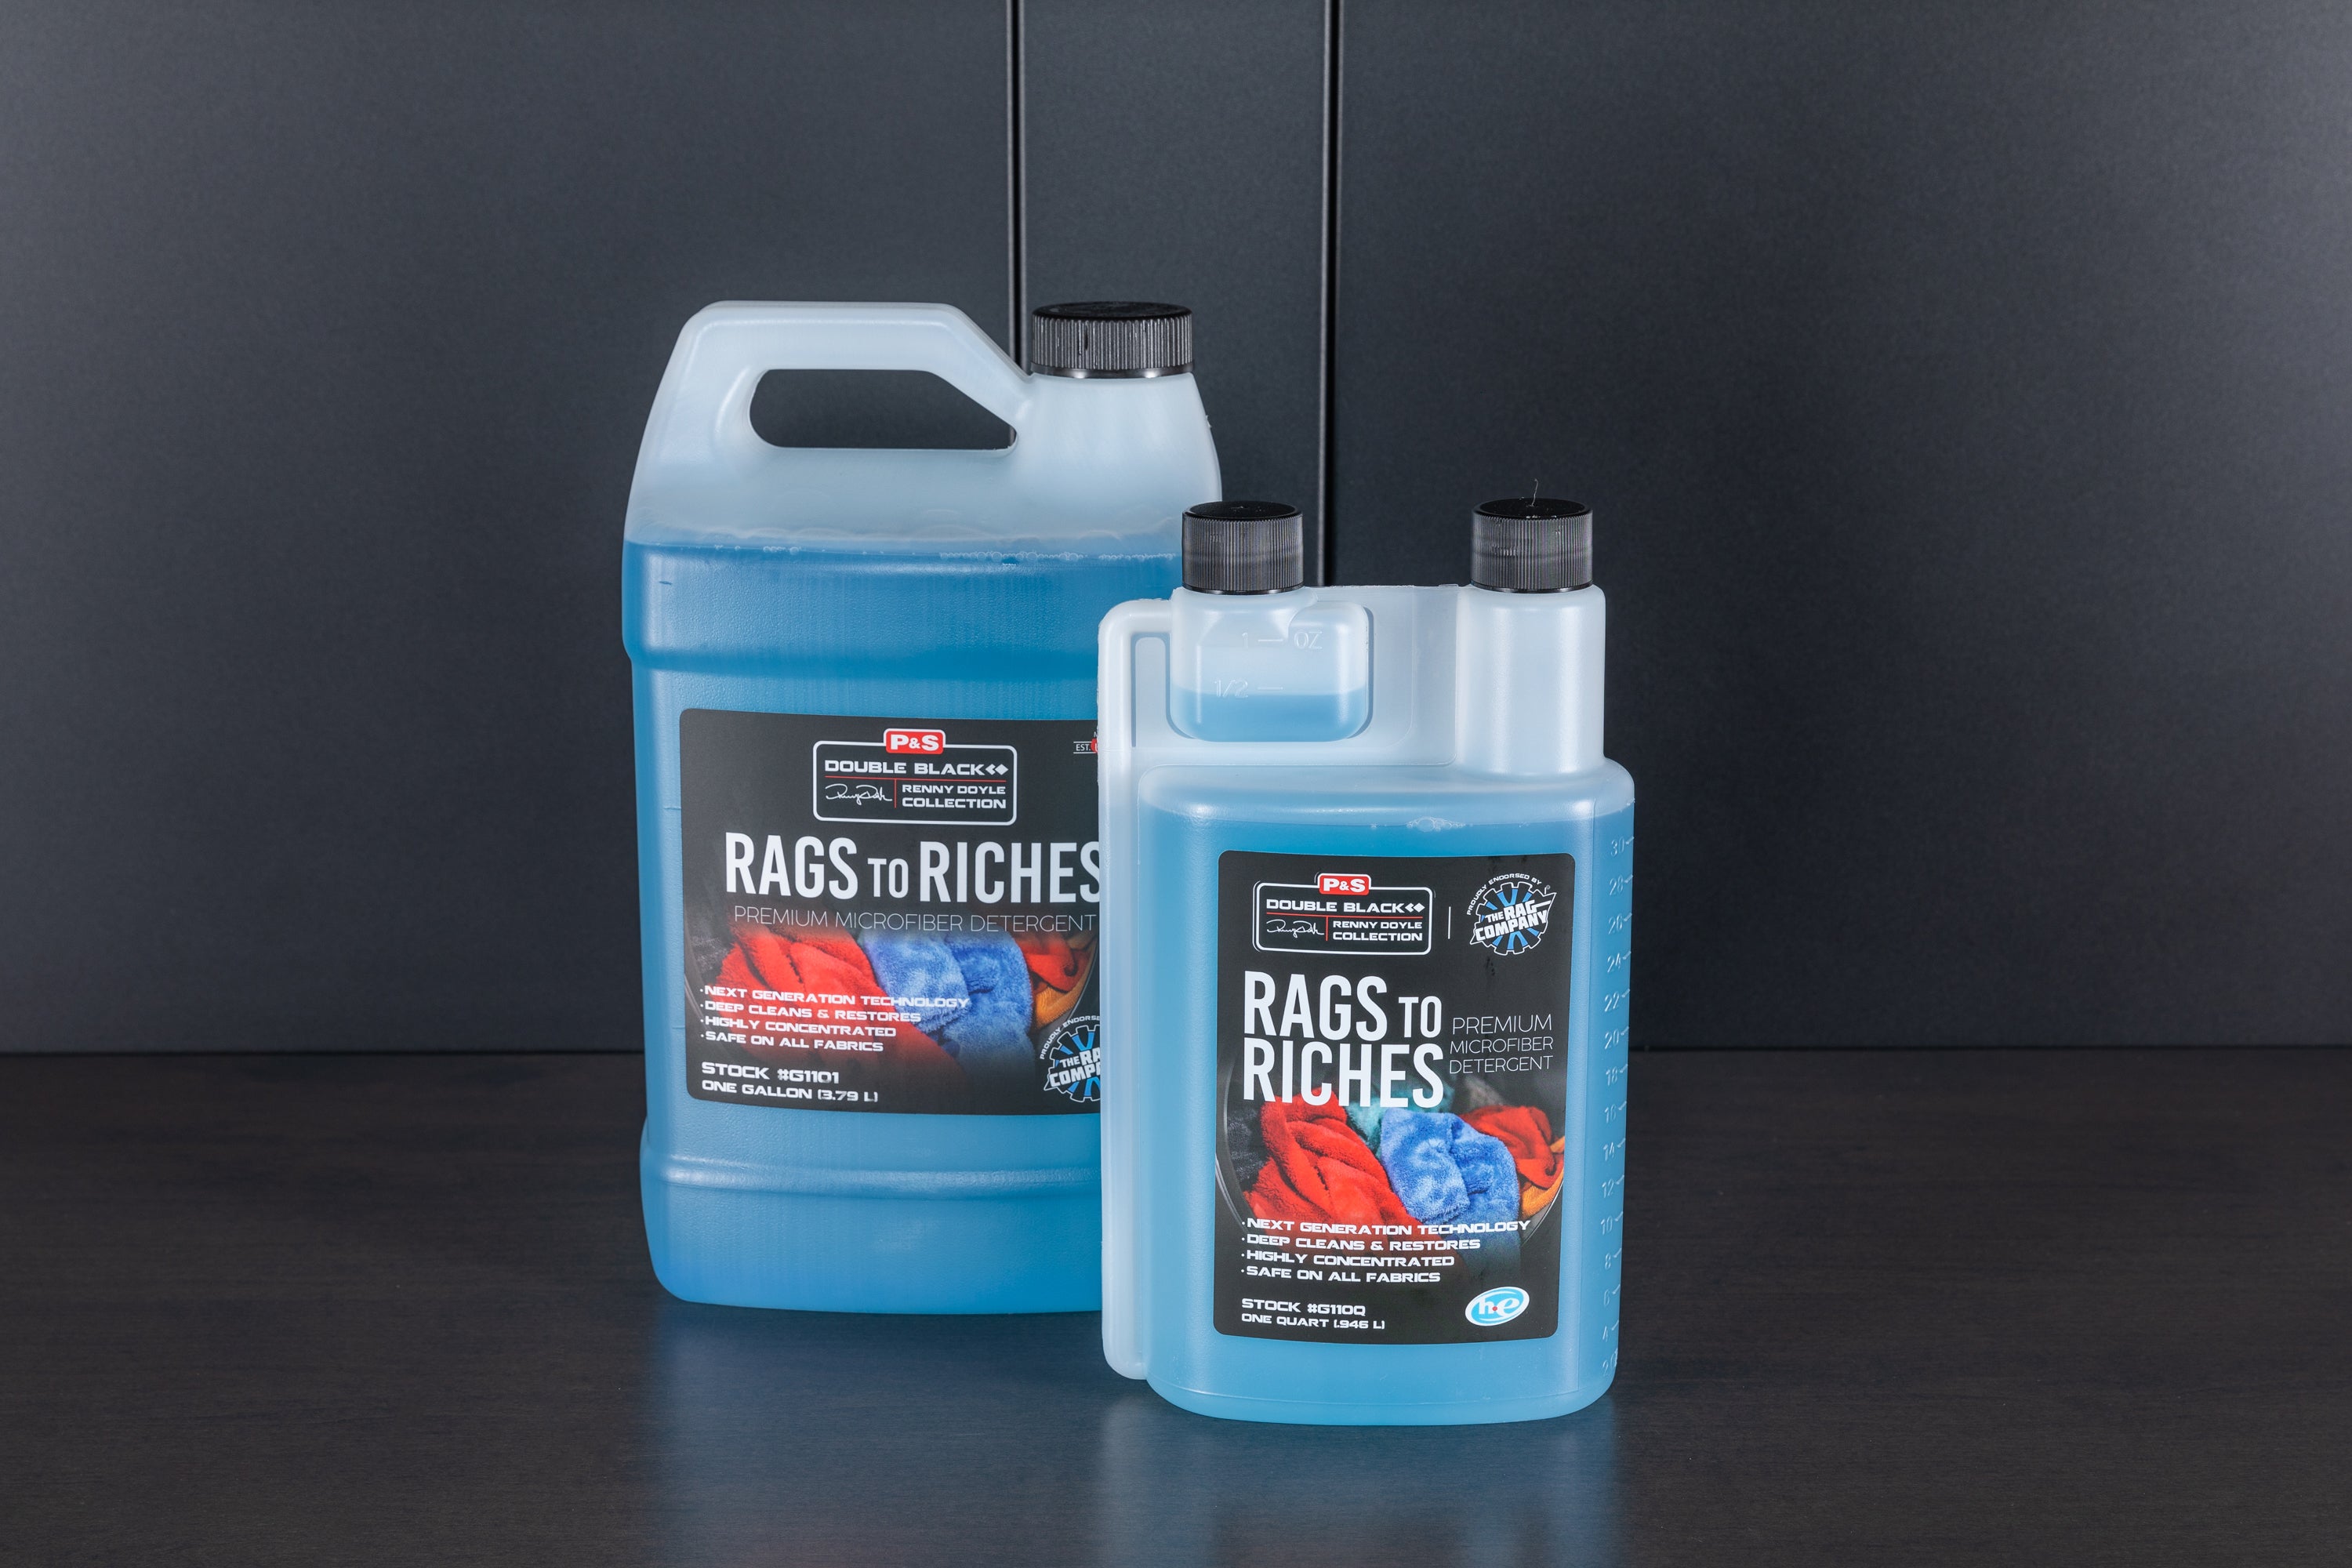 The Rag Company - THANK YOU! The launch of Rags to Riches has been a huge  success! We never thought people would get as excited about a Microfiber  Wash as we are.